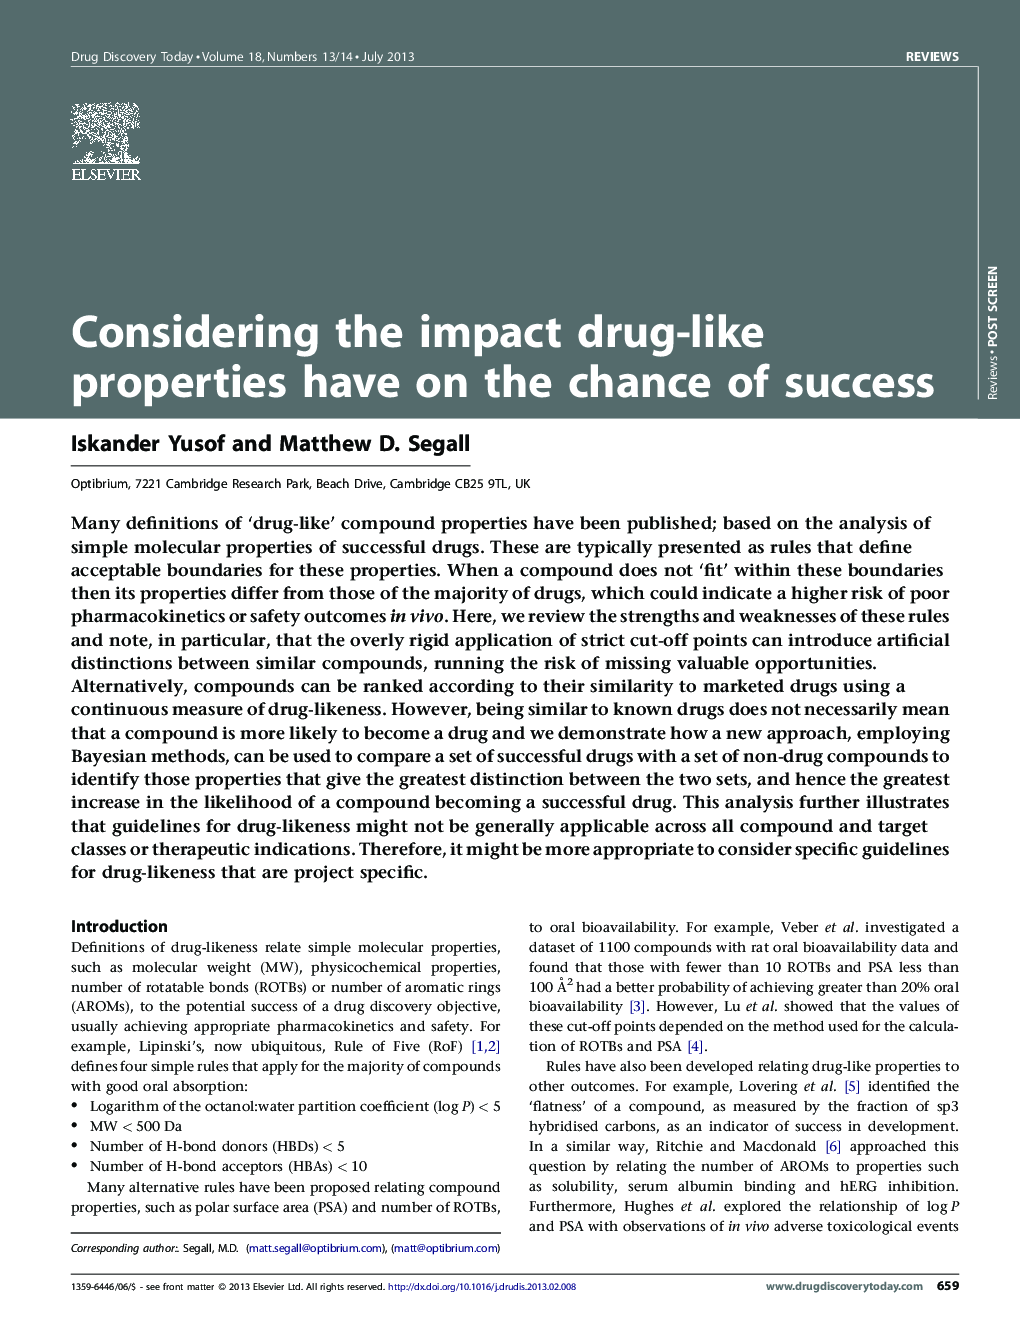 Considering the impact drug-like properties have on the chance of success